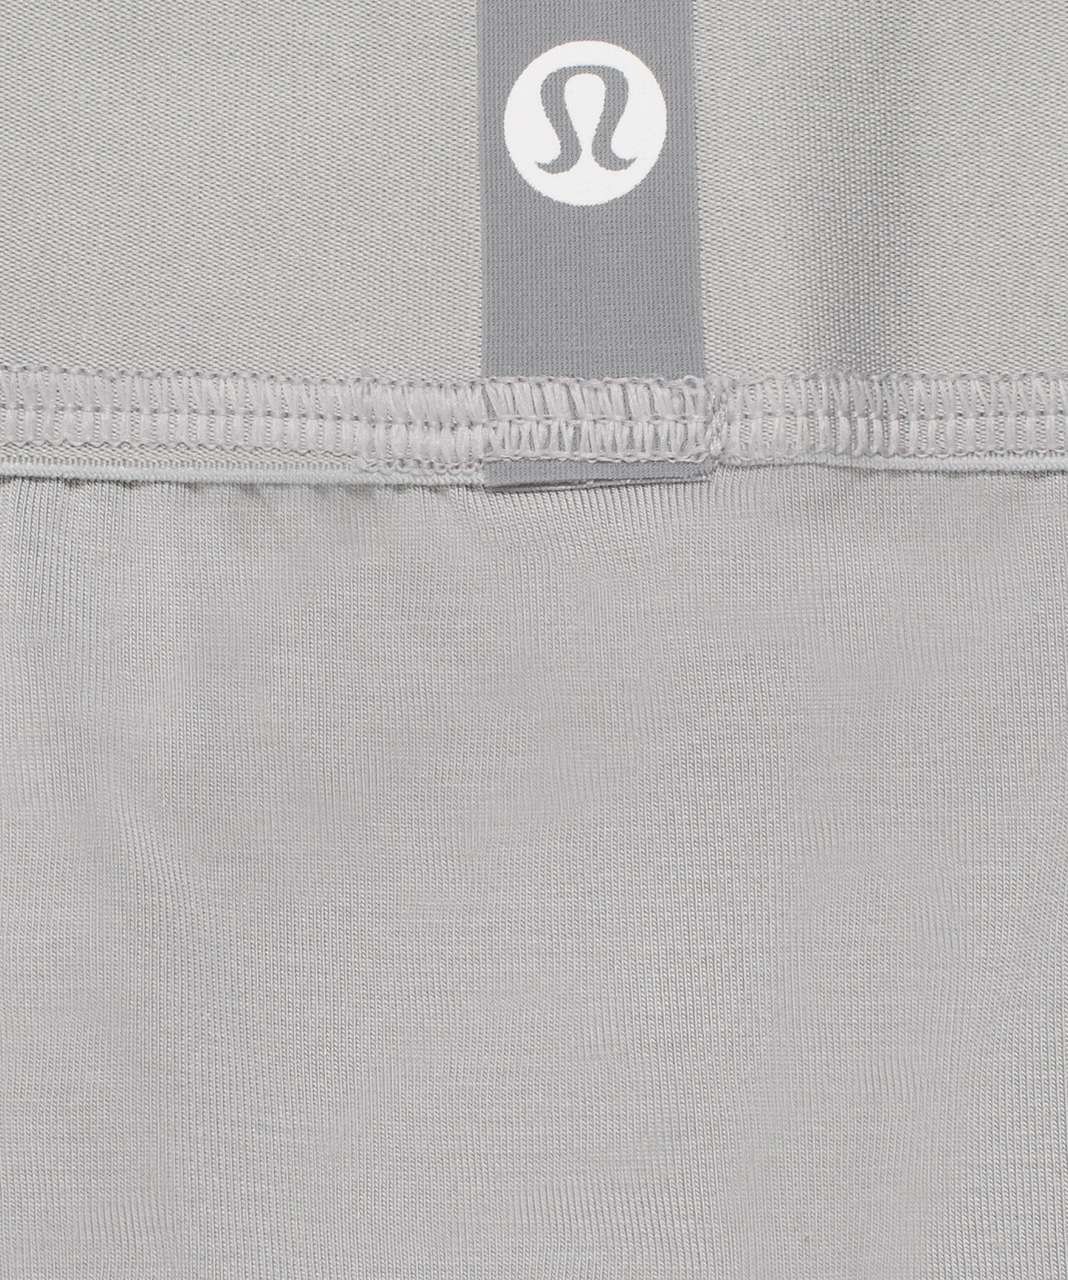 Lululemon Always In Motion Brief with Fly - Silver Drop